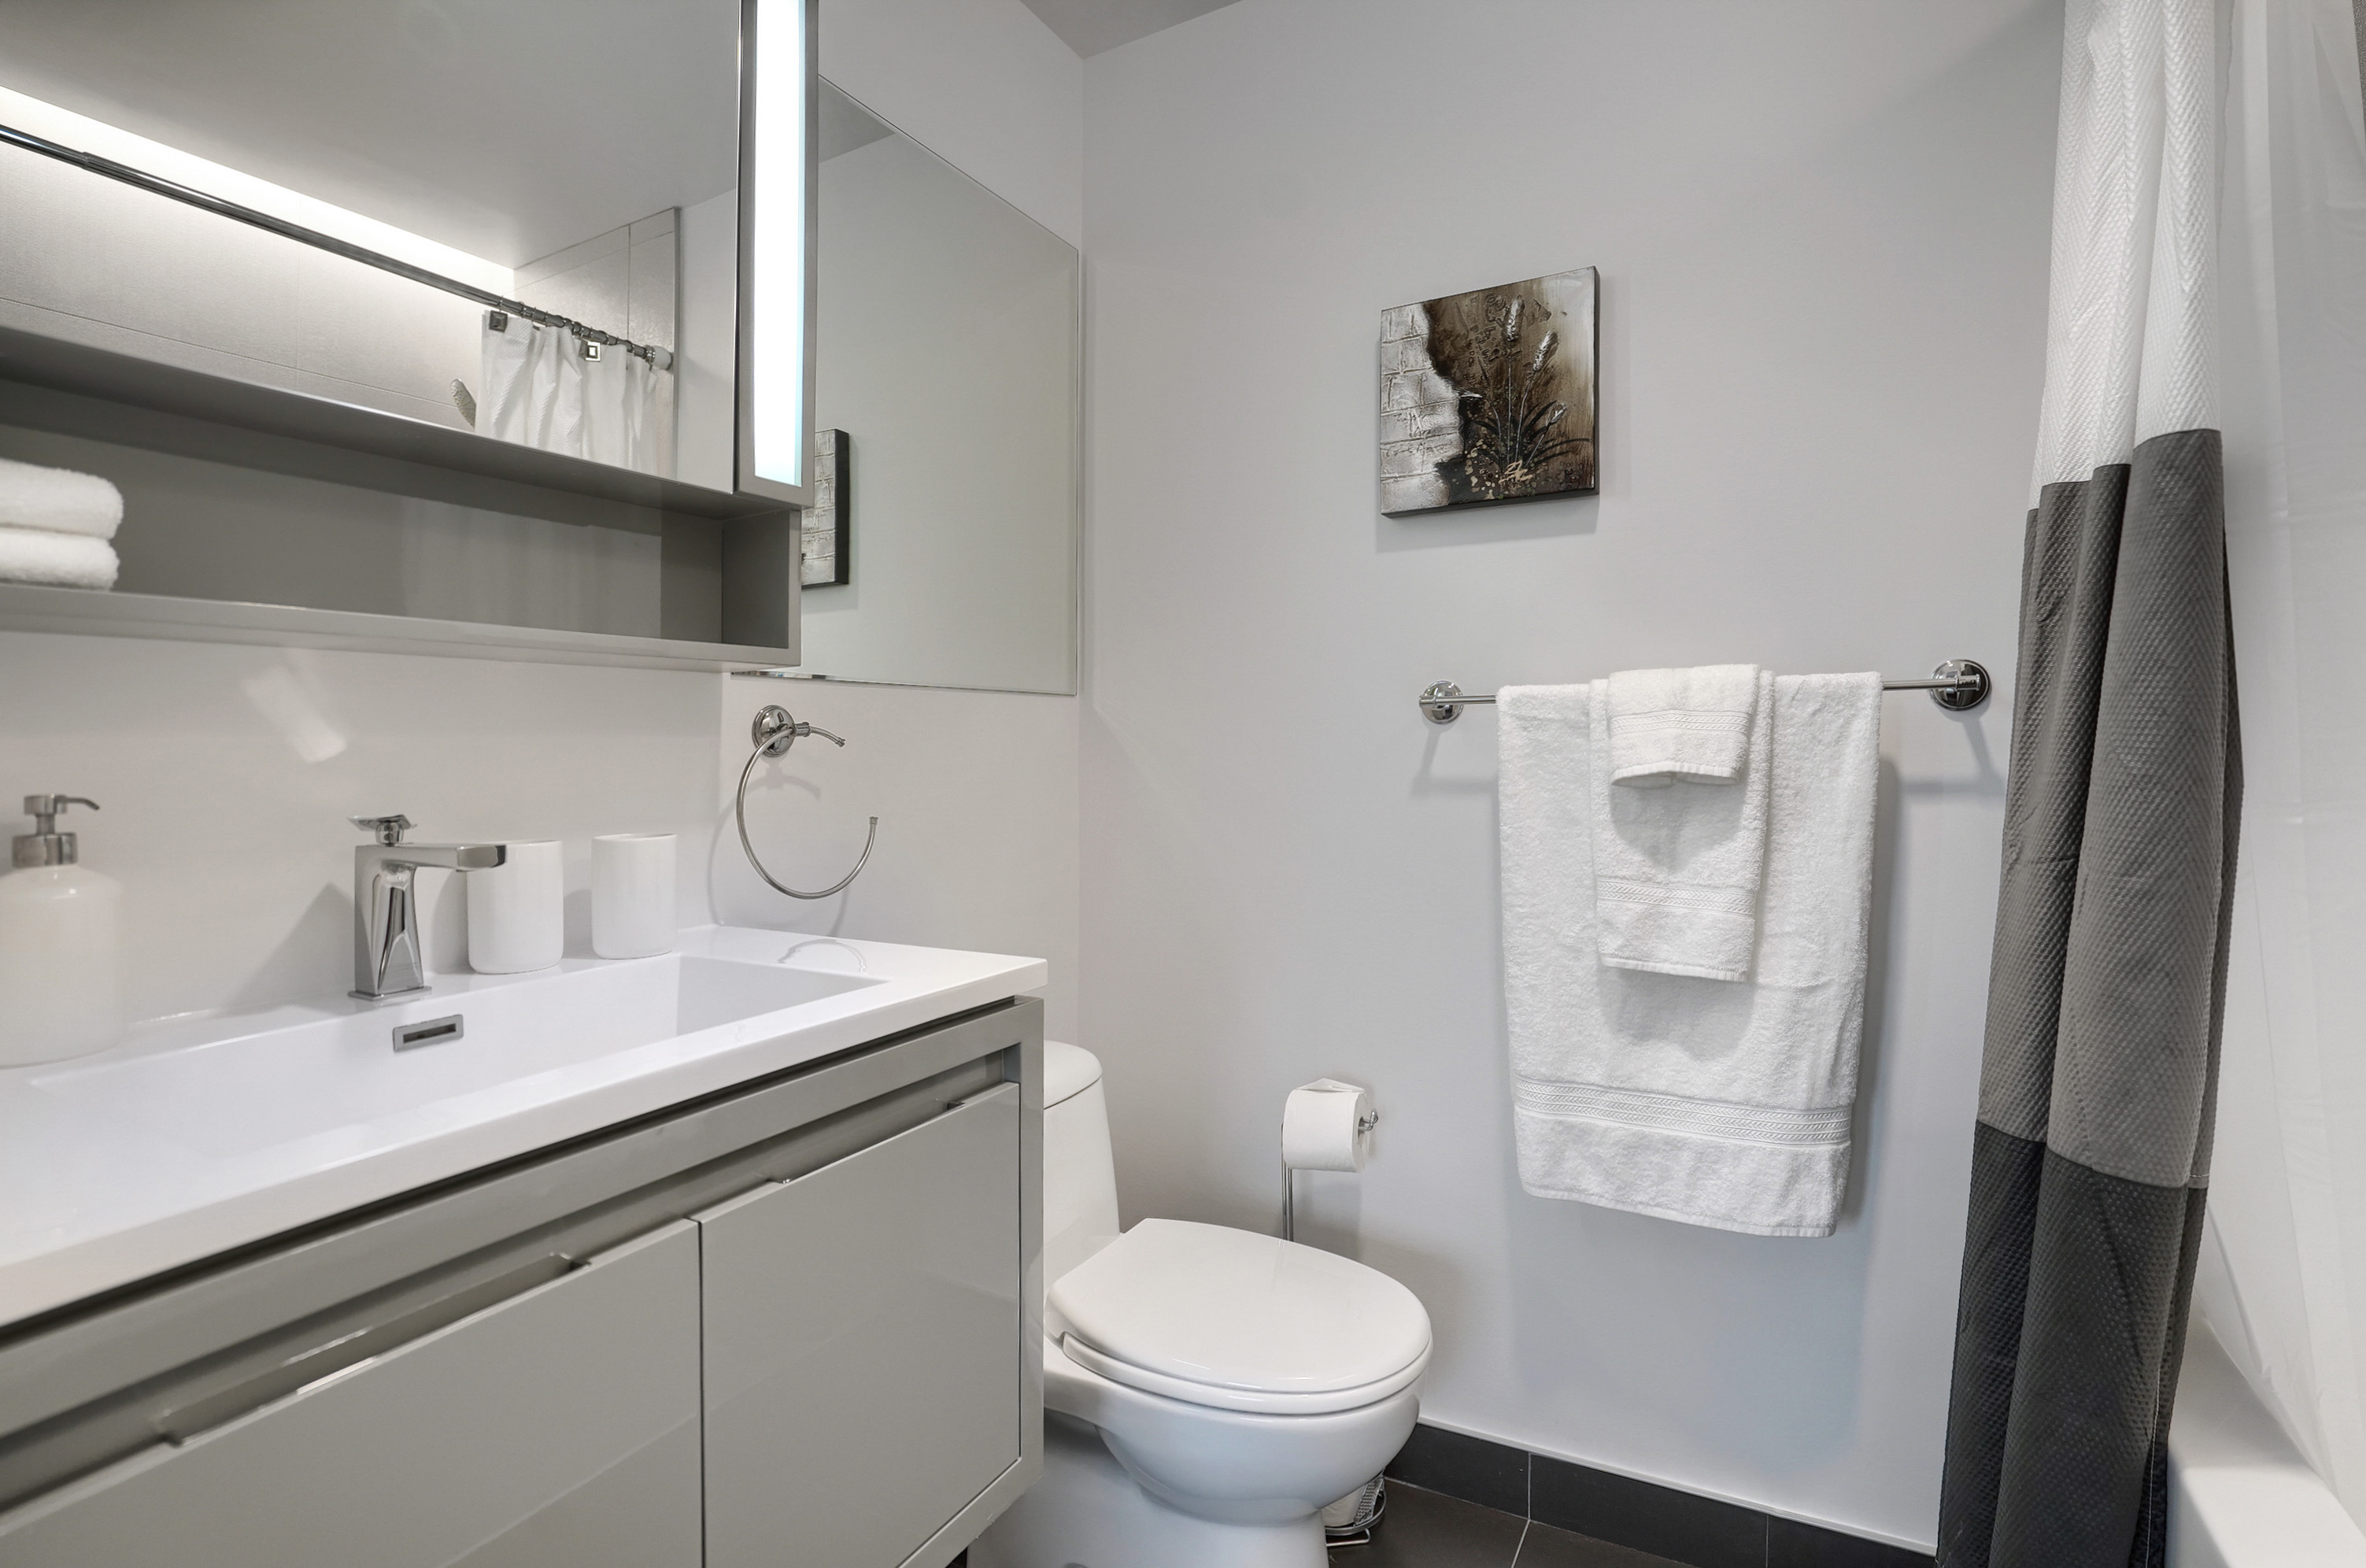 View of the bathroom - light and bright. Light walls, white over-sized sink with designer stainless faucet, darker accent cabinets, white tub with shower. Spacious bathroom in this furnished suite in Montreal 